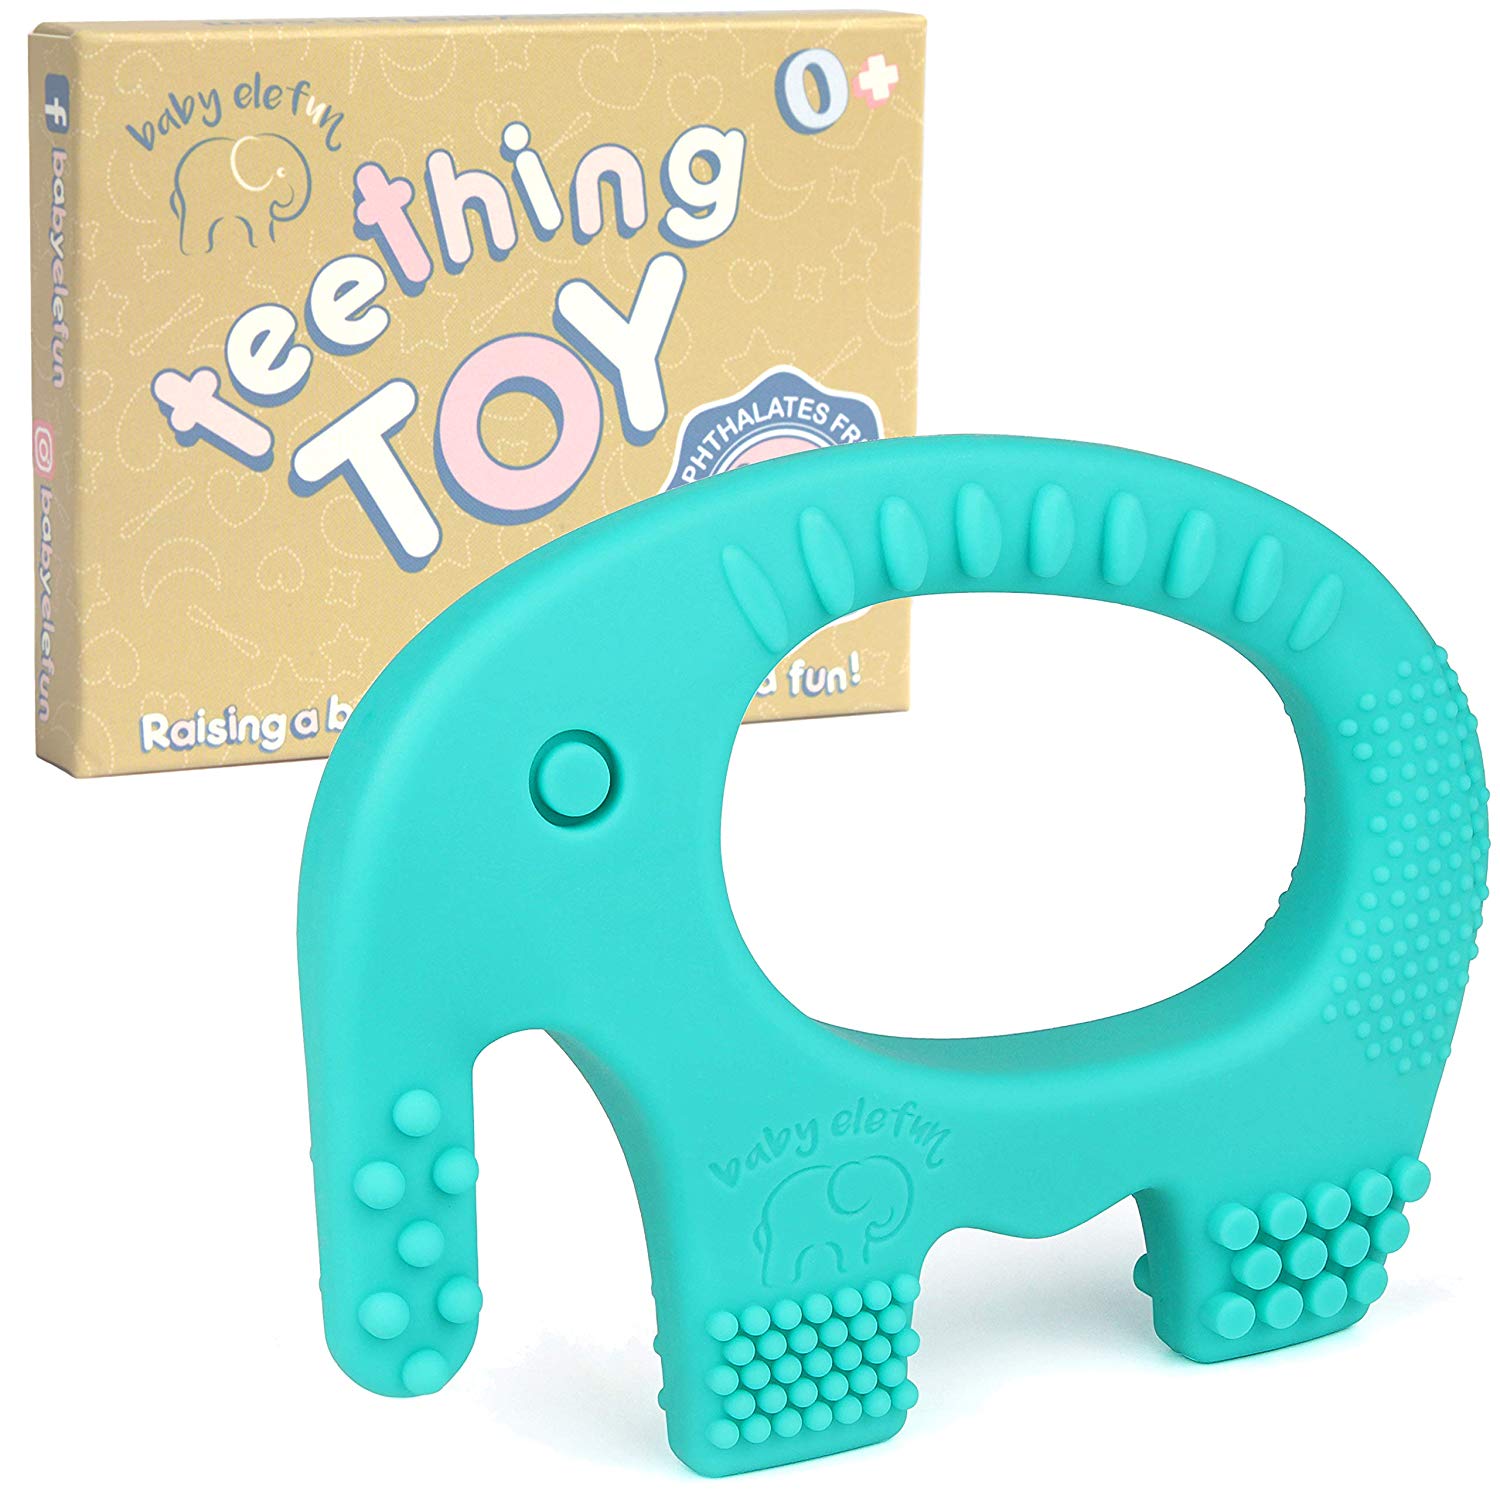 Easy To Hold Highly Effective Elephant Teether Soft Teething Toys For Boys Teethers For Babies Bpa Free Silicone Best for Freezer Bendable Cool 3 6 12 Months 1 Year Old Baby Shower Gifts